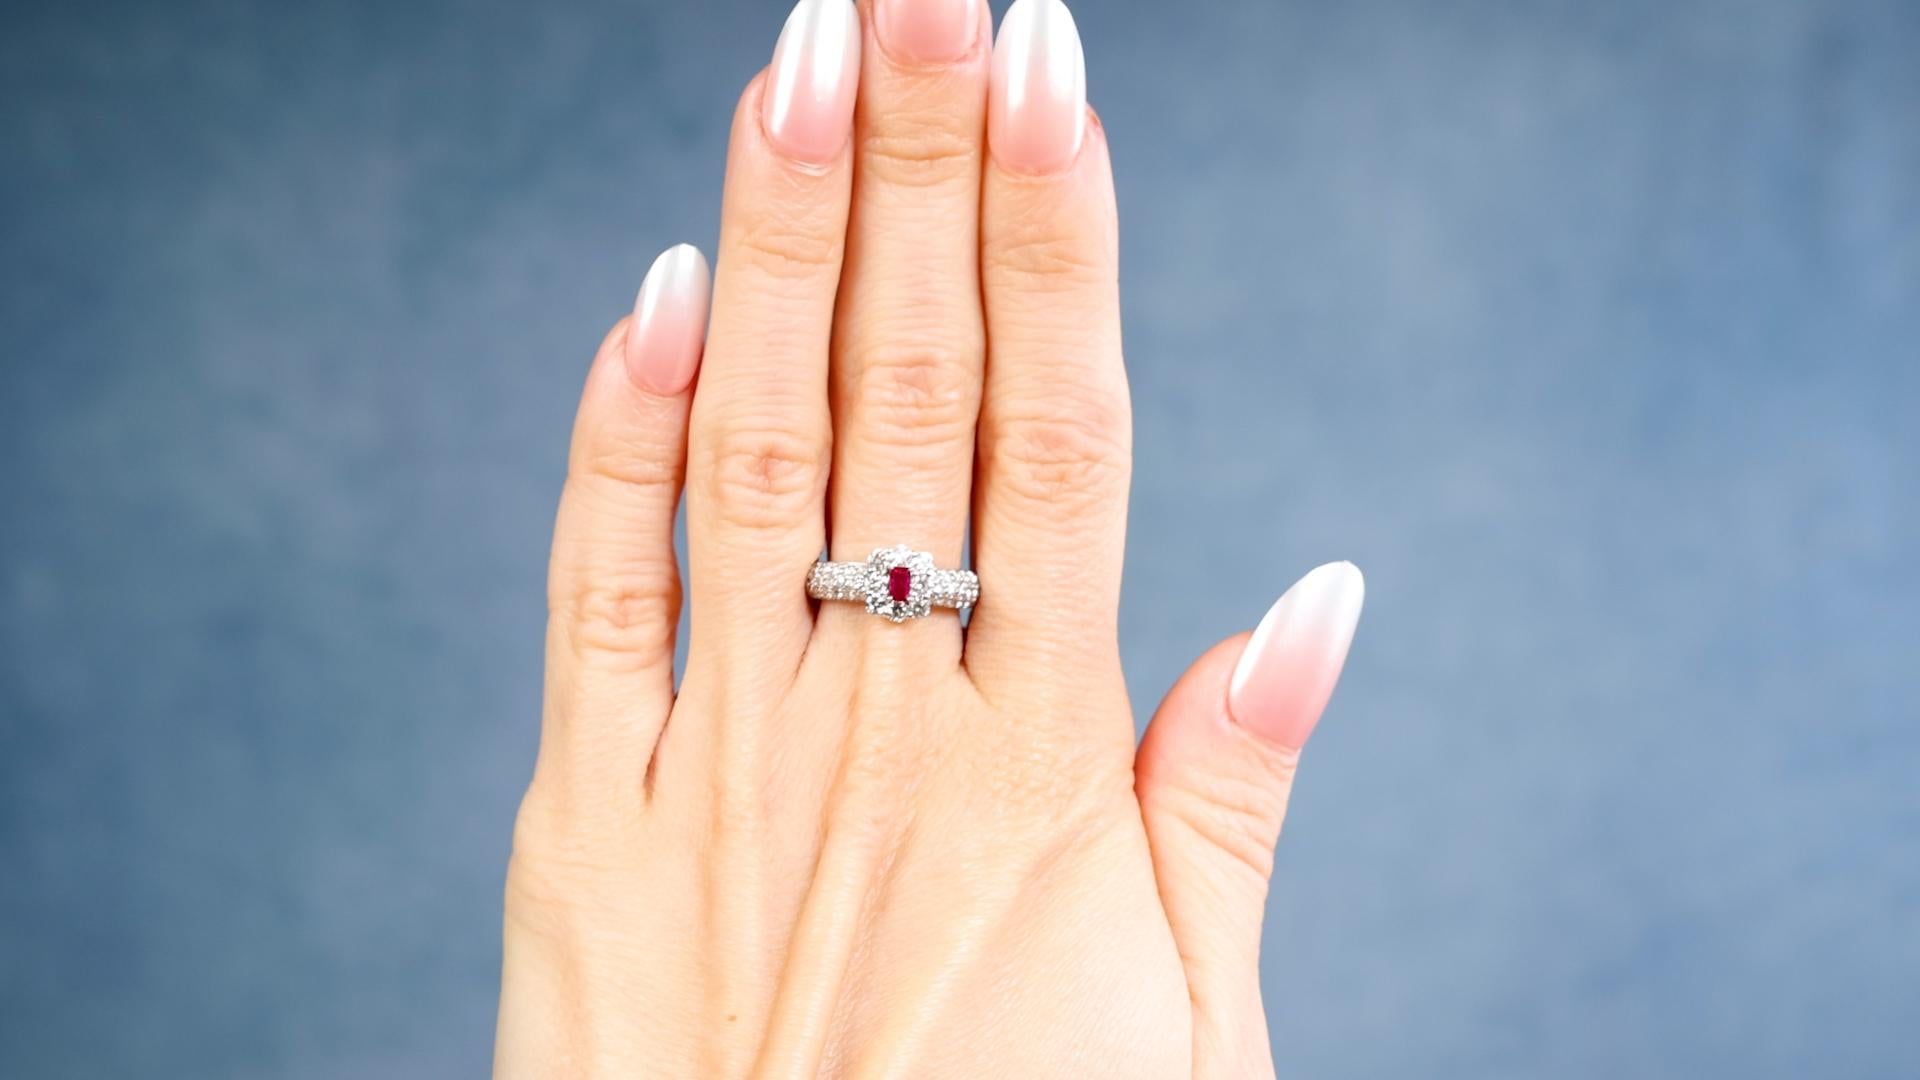 One Ruby Diamond Platinum Ring. Featuring one baguette cut ruby of 0.18 carat. Accented by 38 round brilliant cut diamonds with a total weight of 0.86 carat, graded near-colorless, SI clarity. Crafted in platinum with purity mark and gemstone